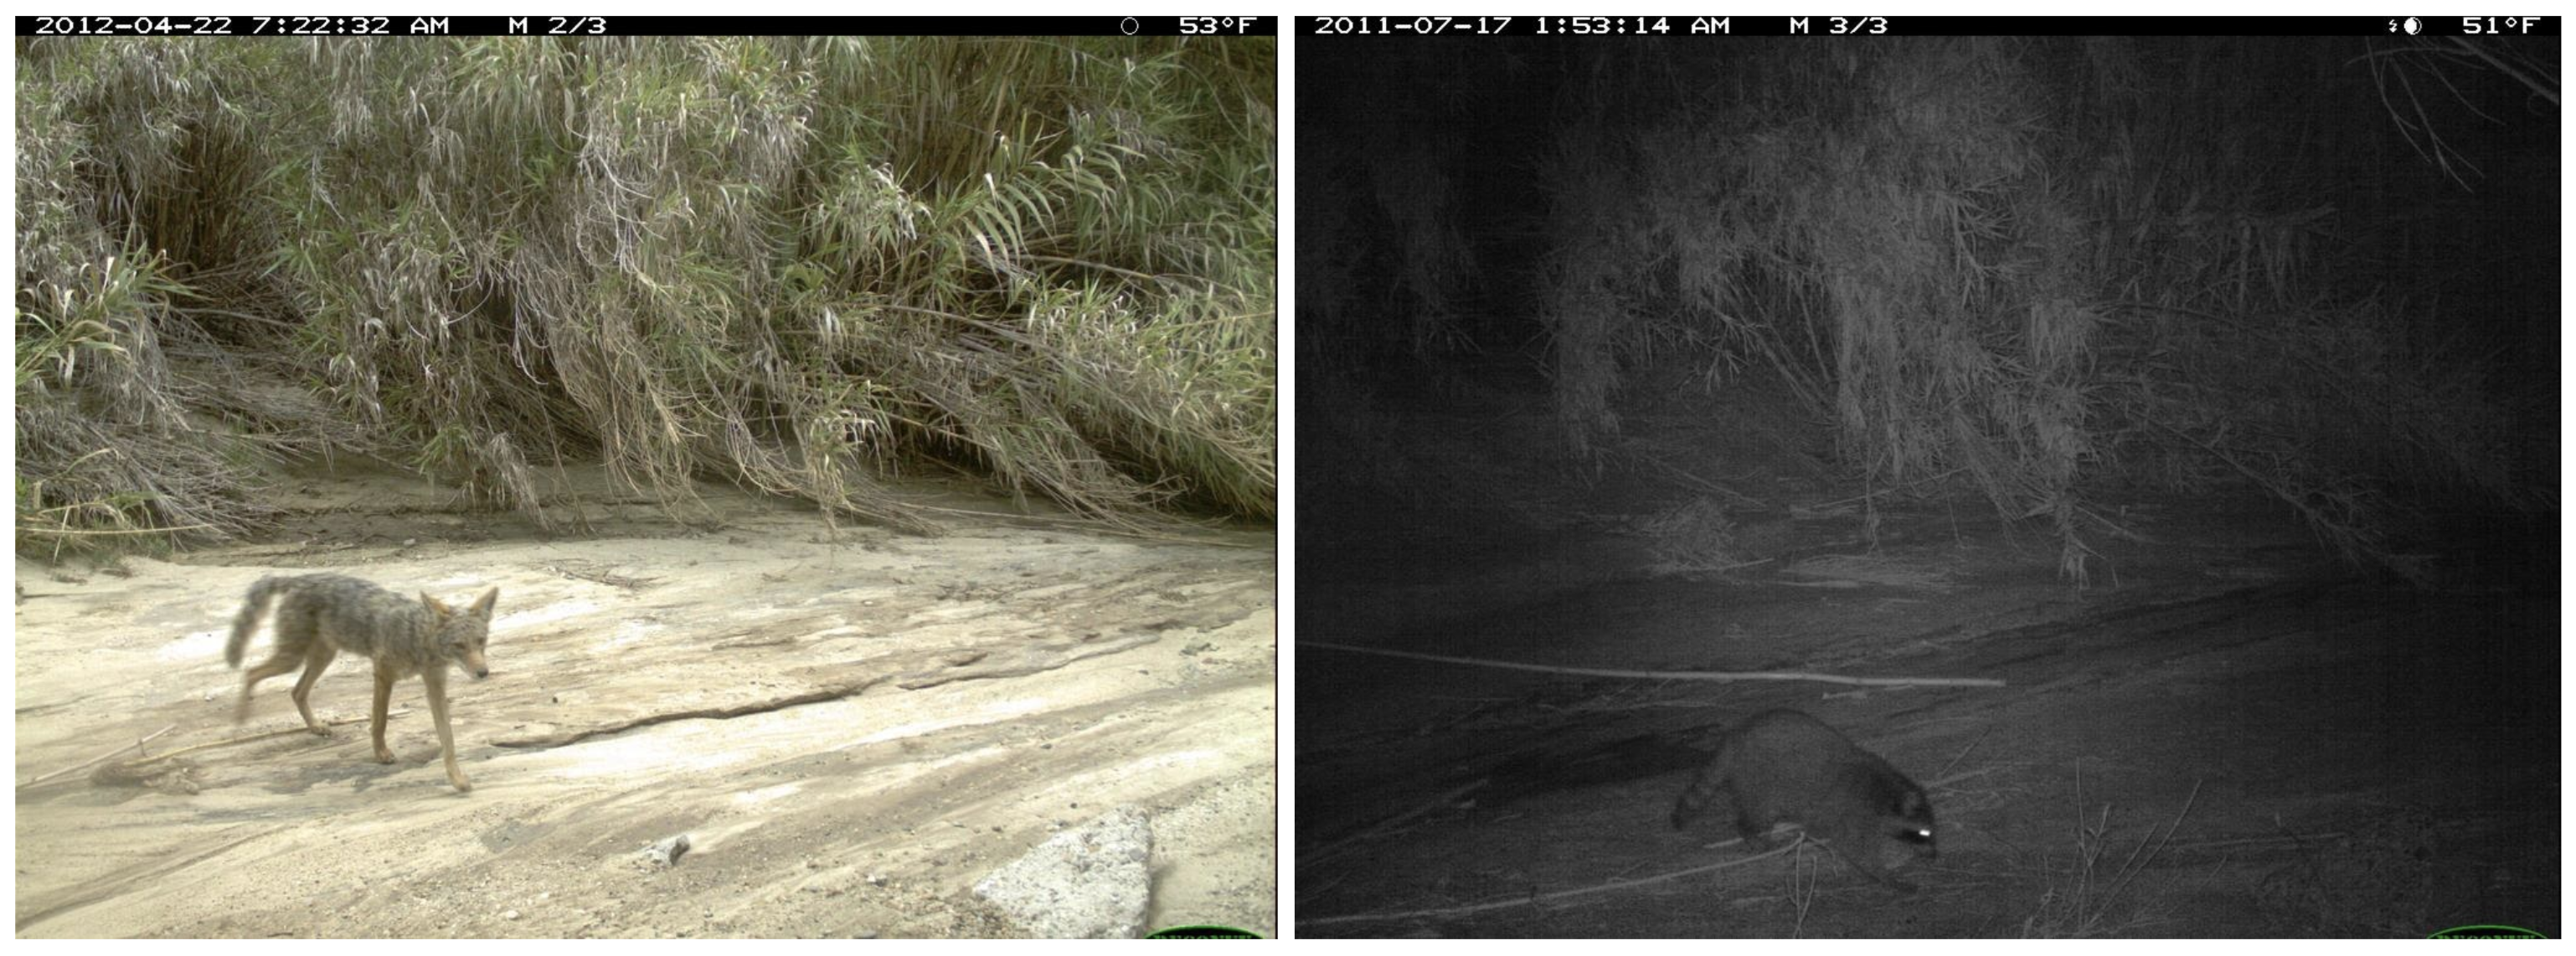 Left, a coyote in its natural environment. Right, a raccoon in the same location at night. Image credit: The iWildCam 2019 Challenge Dataset, used under the Community Data License Agreement.